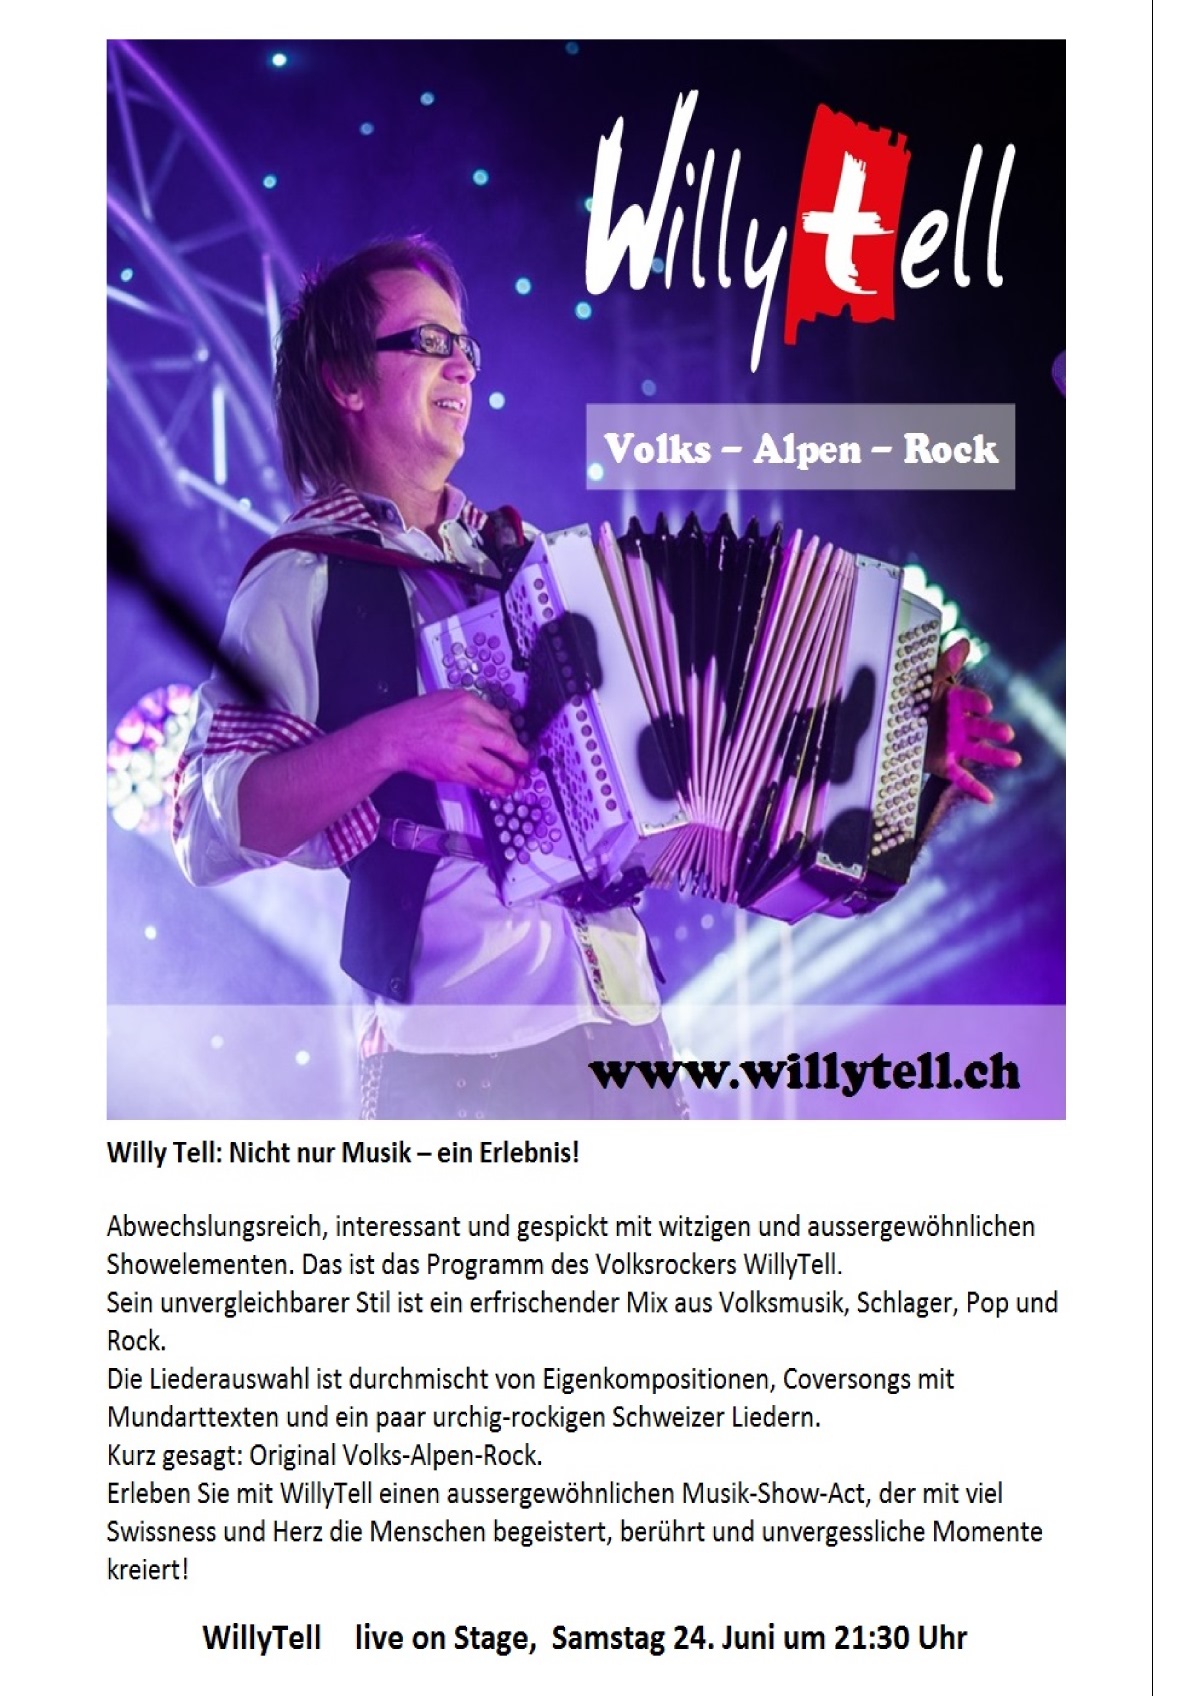 WILLY TELL LIVE ON STAGE SAMSTAG 24. JUNI 21:30 UHR